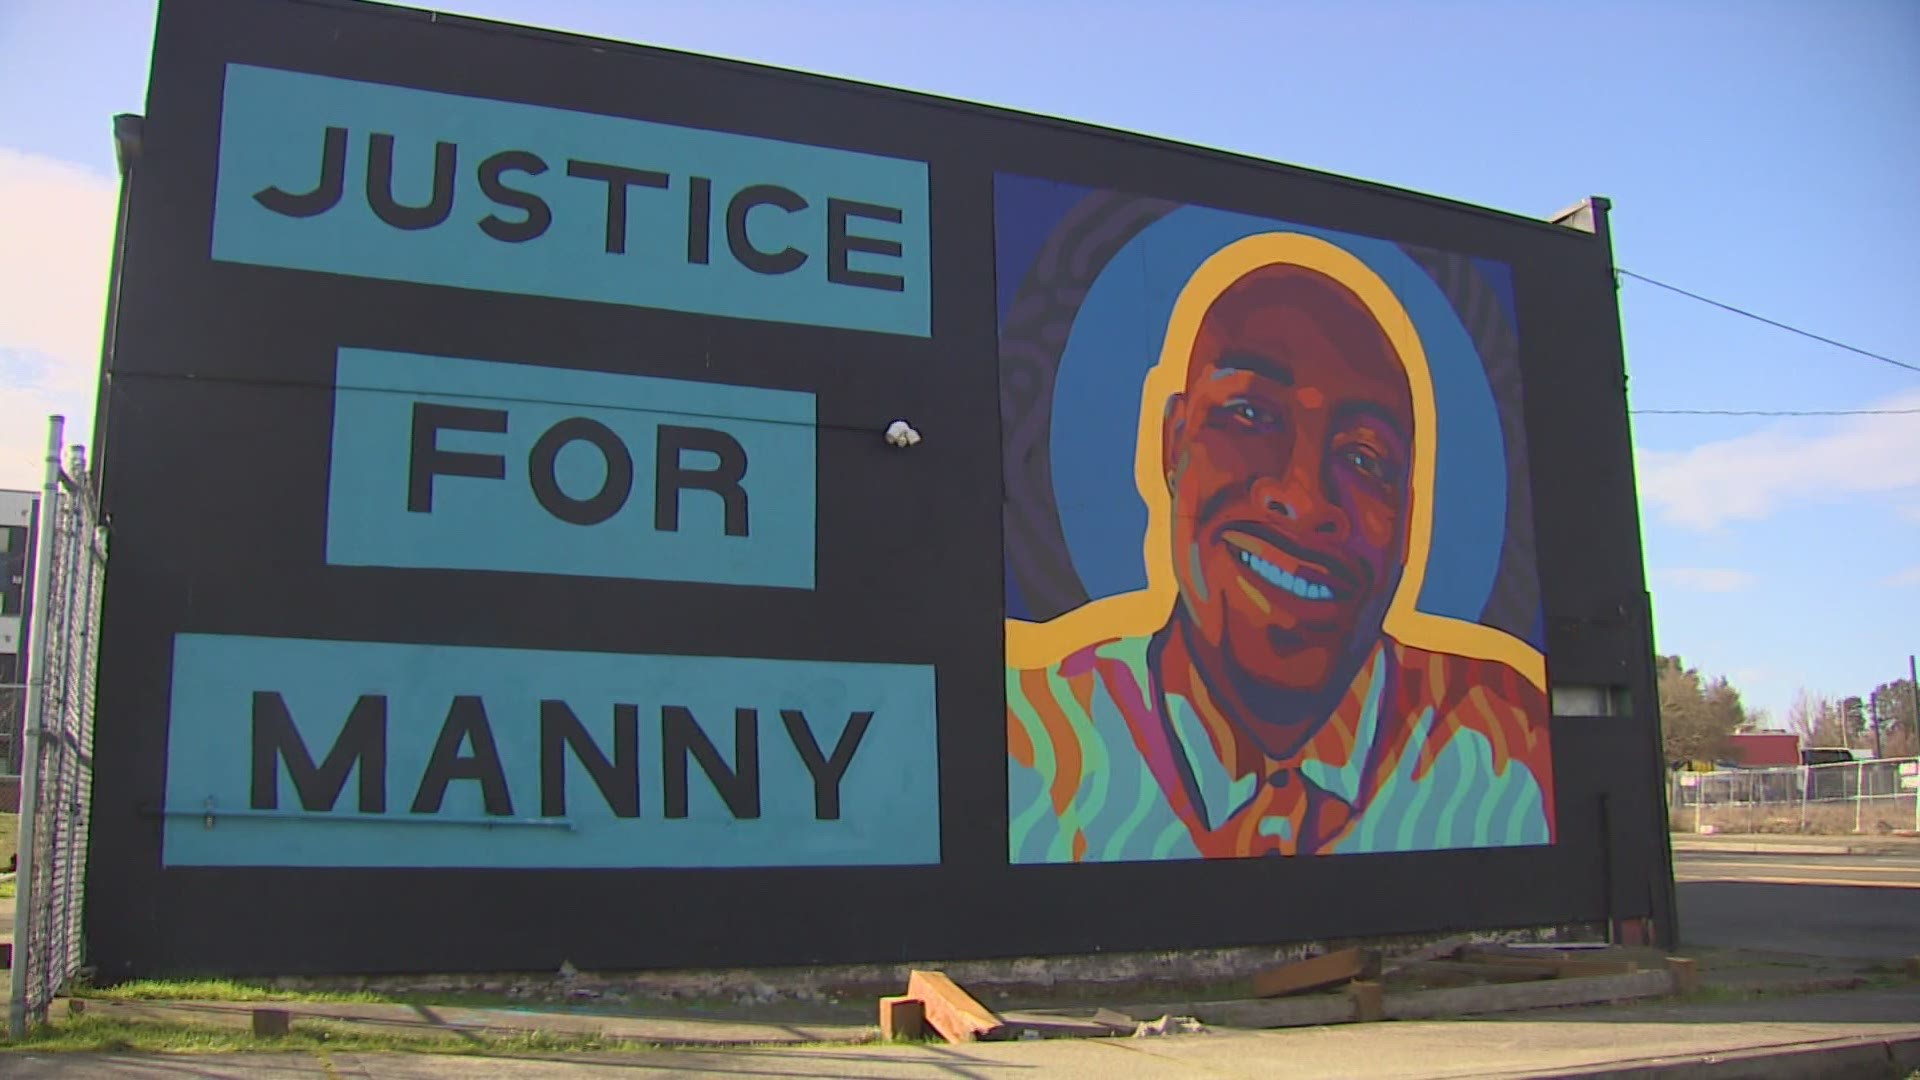 Manuel Ellis, a Black man, died while being restrained by Tacoma police in March 2020. His death has since been ruled a homicide.